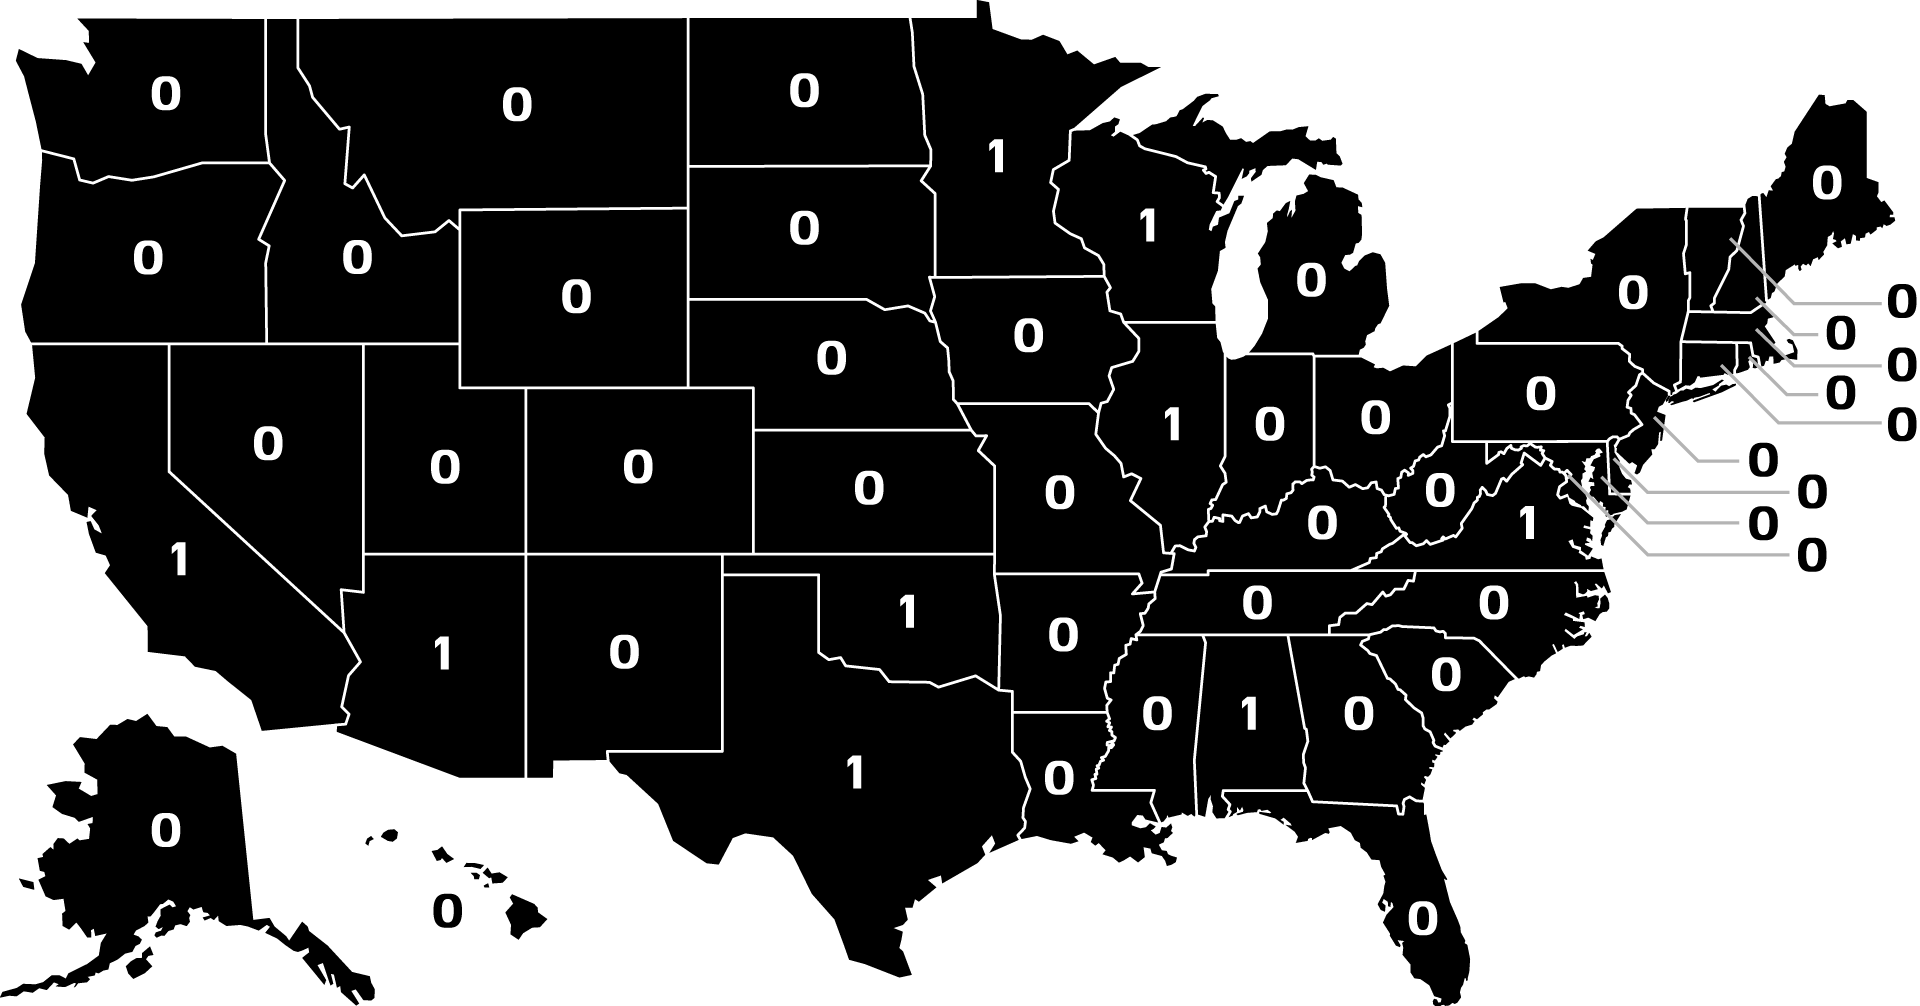 Outline map of US states with number of male supremacy groups.